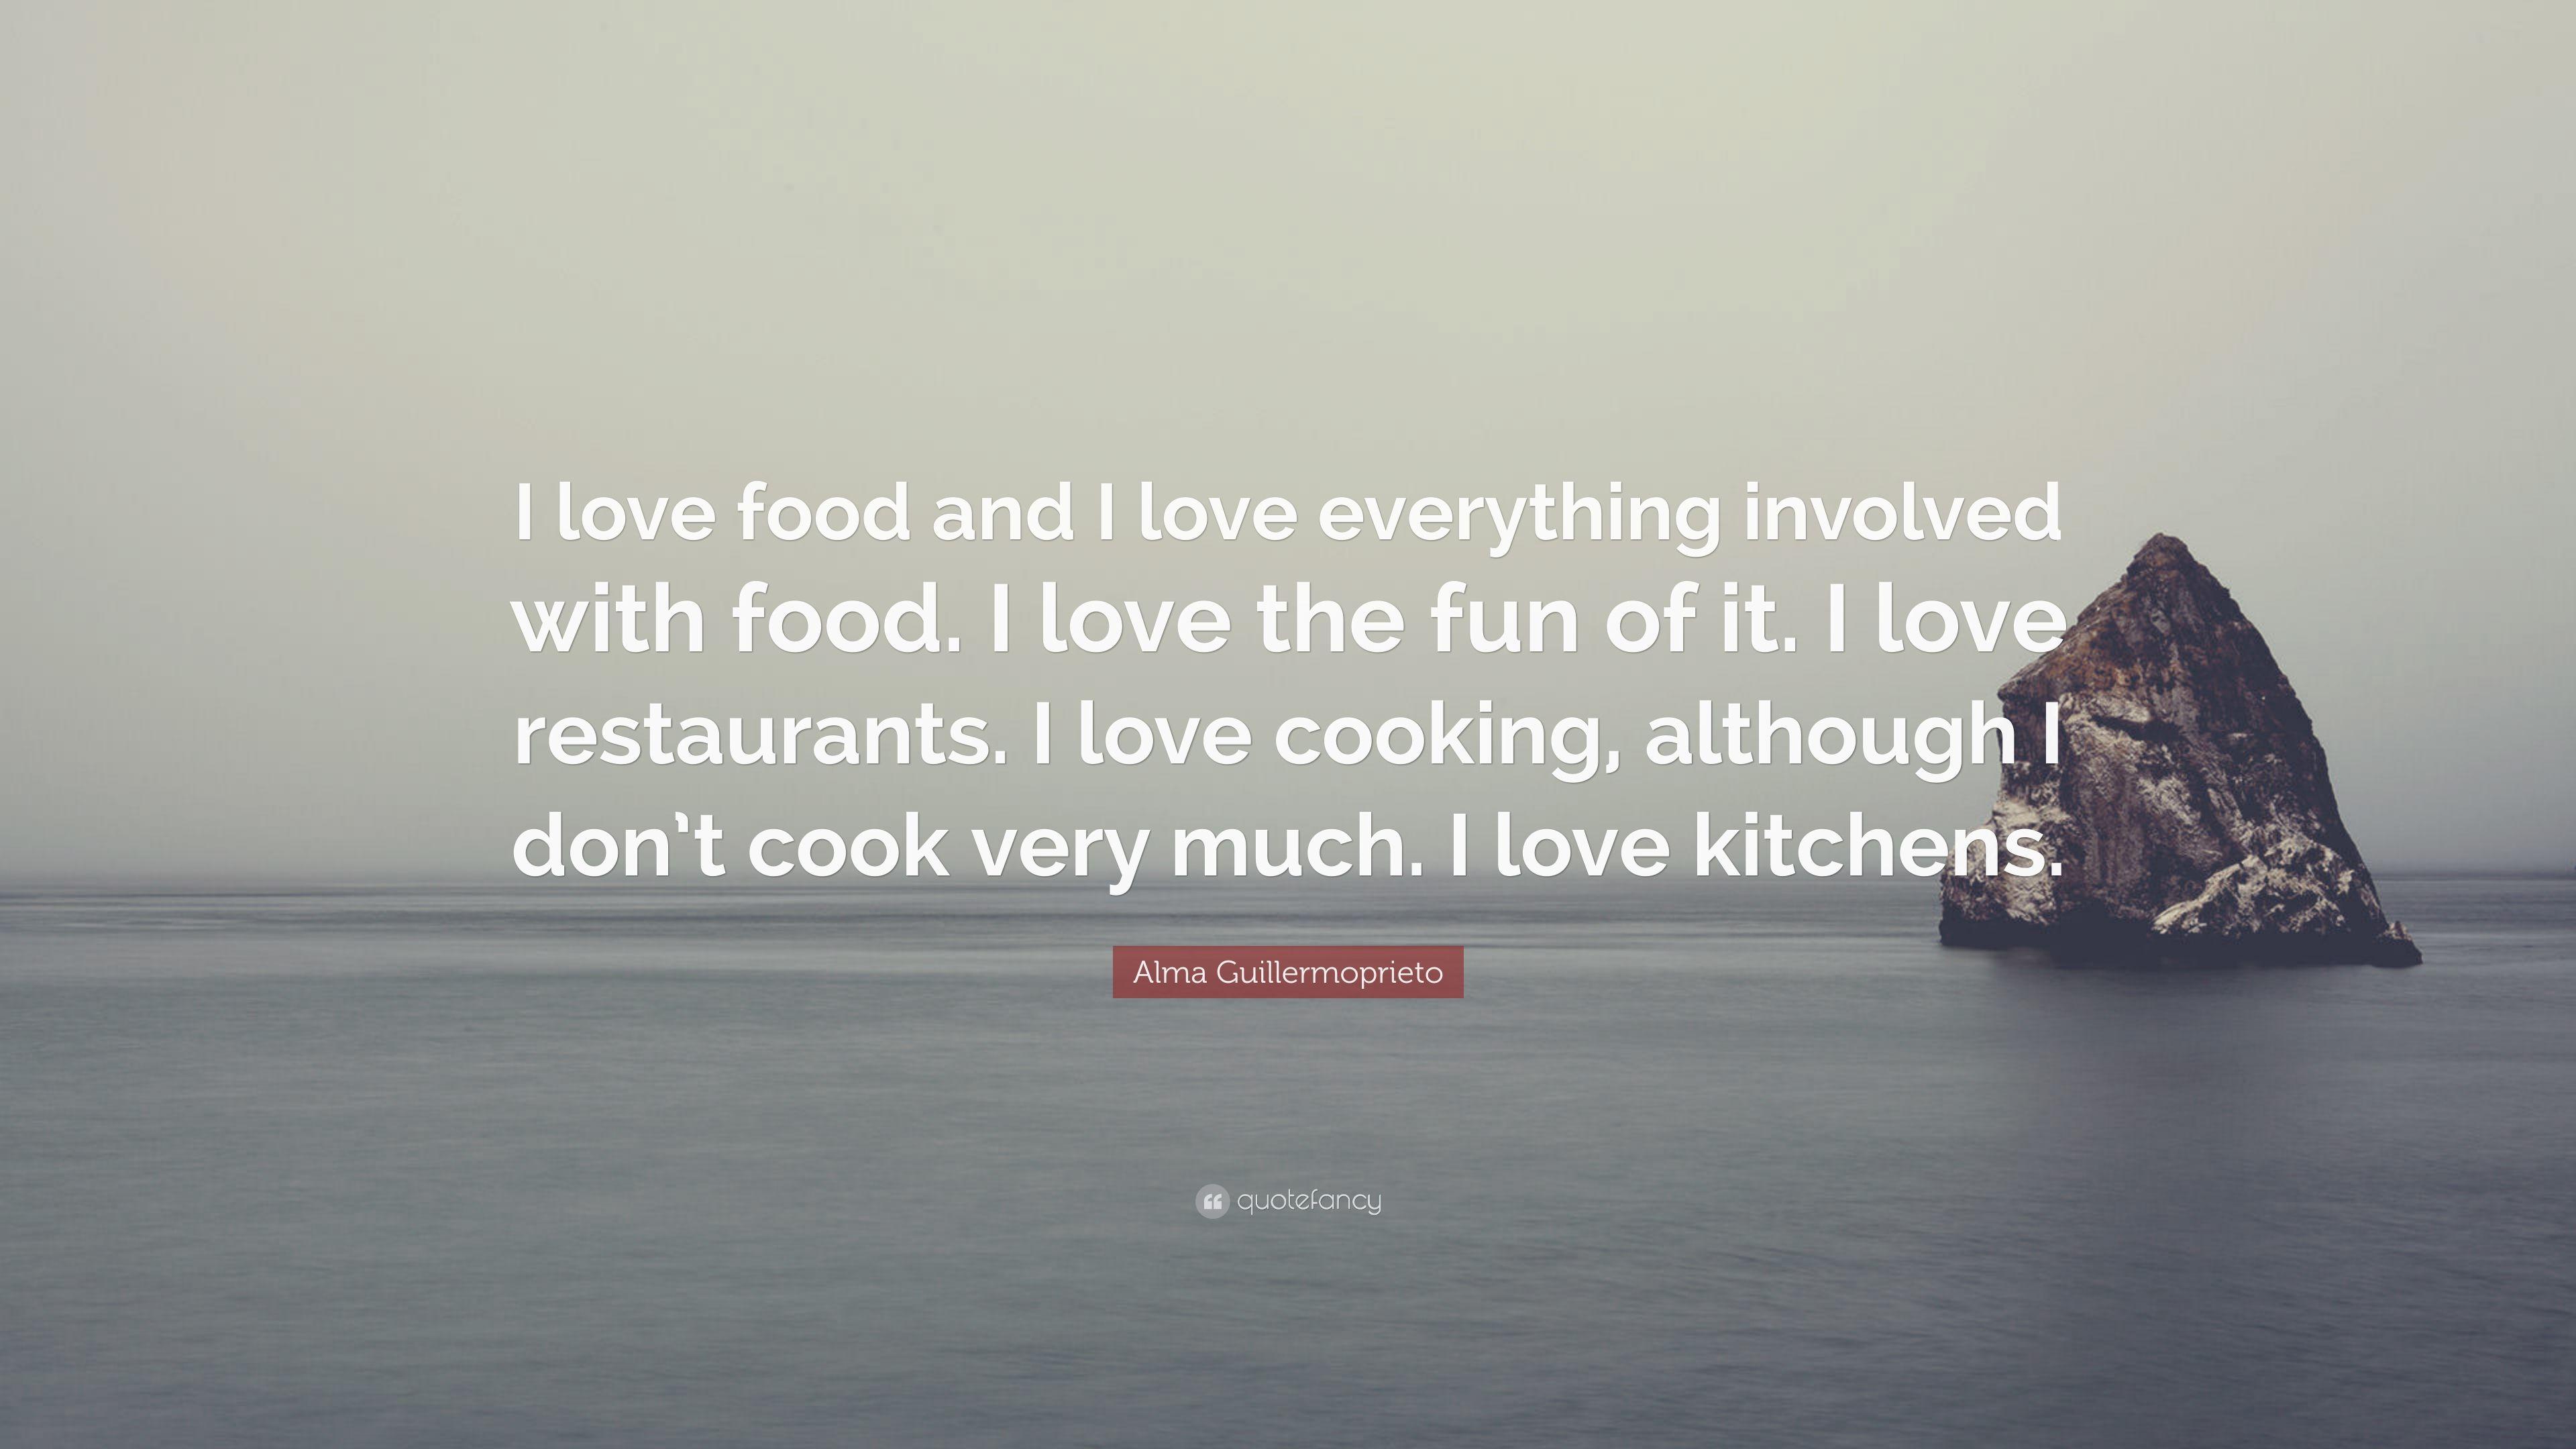 Alma Guillermoprieto Quote: “I love food and I love everything